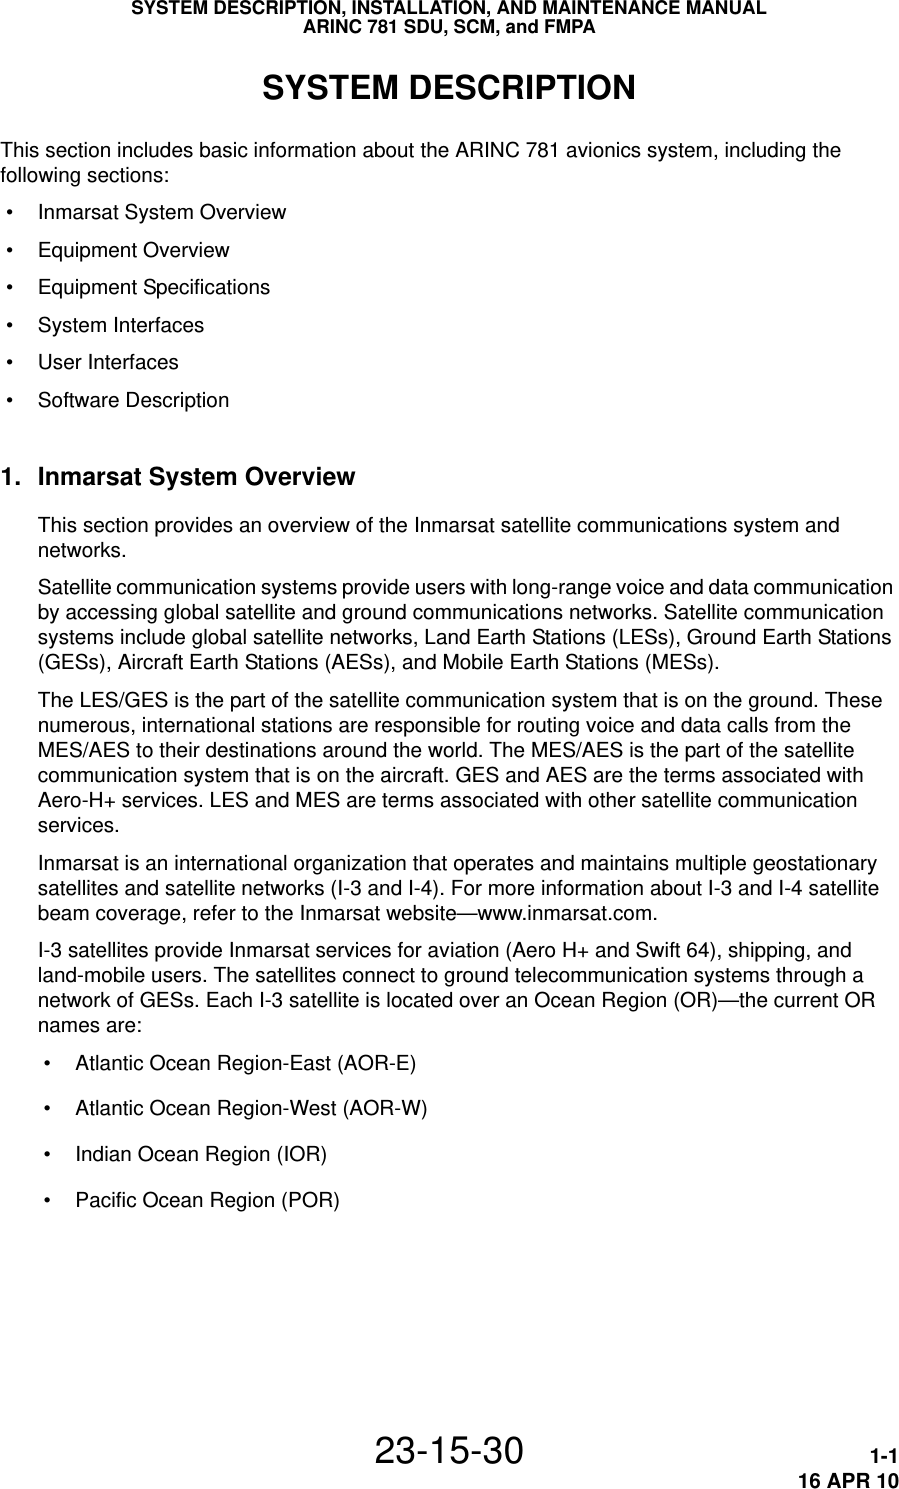 SYSTEM DESCRIPTION, INSTALLATION, AND MAINTENANCE MANUALARINC 781 SDU, SCM, and FMPA23-15-30 1-116 APR 10SYSTEM DESCRIPTIONThis section includes basic information about the ARINC 781 avionics system, including the following sections: • Inmarsat System Overview • Equipment Overview • Equipment Specifications • System Interfaces • User Interfaces • Software Description1. Inmarsat System OverviewThis section provides an overview of the Inmarsat satellite communications system and networks.Satellite communication systems provide users with long-range voice and data communication by accessing global satellite and ground communications networks. Satellite communication systems include global satellite networks, Land Earth Stations (LESs), Ground Earth Stations (GESs), Aircraft Earth Stations (AESs), and Mobile Earth Stations (MESs).The LES/GES is the part of the satellite communication system that is on the ground. These numerous, international stations are responsible for routing voice and data calls from the MES/AES to their destinations around the world. The MES/AES is the part of the satellite communication system that is on the aircraft. GES and AES are the terms associated with Aero-H+ services. LES and MES are terms associated with other satellite communication services.Inmarsat is an international organization that operates and maintains multiple geostationary satellites and satellite networks (I-3 and I-4). For more information about I-3 and I-4 satellite beam coverage, refer to the Inmarsat website—www.inmarsat.com.I-3 satellites provide Inmarsat services for aviation (Aero H+ and Swift 64), shipping, and land-mobile users. The satellites connect to ground telecommunication systems through a network of GESs. Each I-3 satellite is located over an Ocean Region (OR)—the current OR names are: • Atlantic Ocean Region-East (AOR-E) • Atlantic Ocean Region-West (AOR-W) • Indian Ocean Region (IOR) • Pacific Ocean Region (POR)